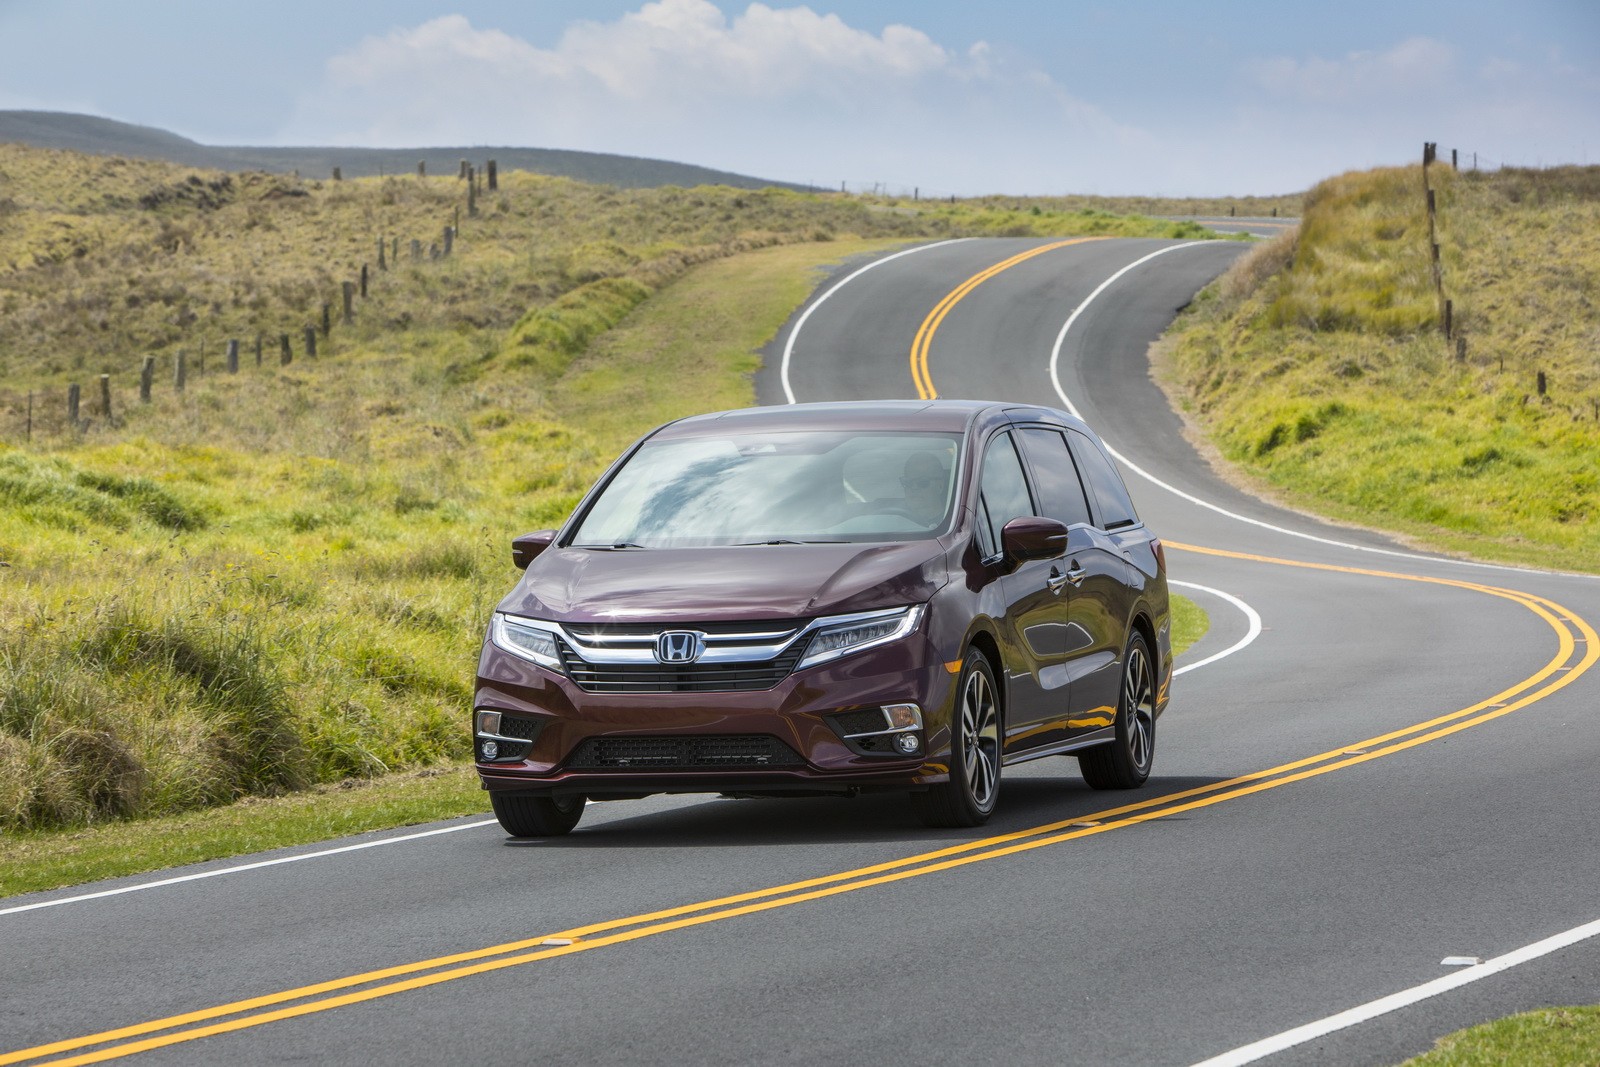 Honda Odyssey Expected To Get The Hybrid Treatment - autoevolution